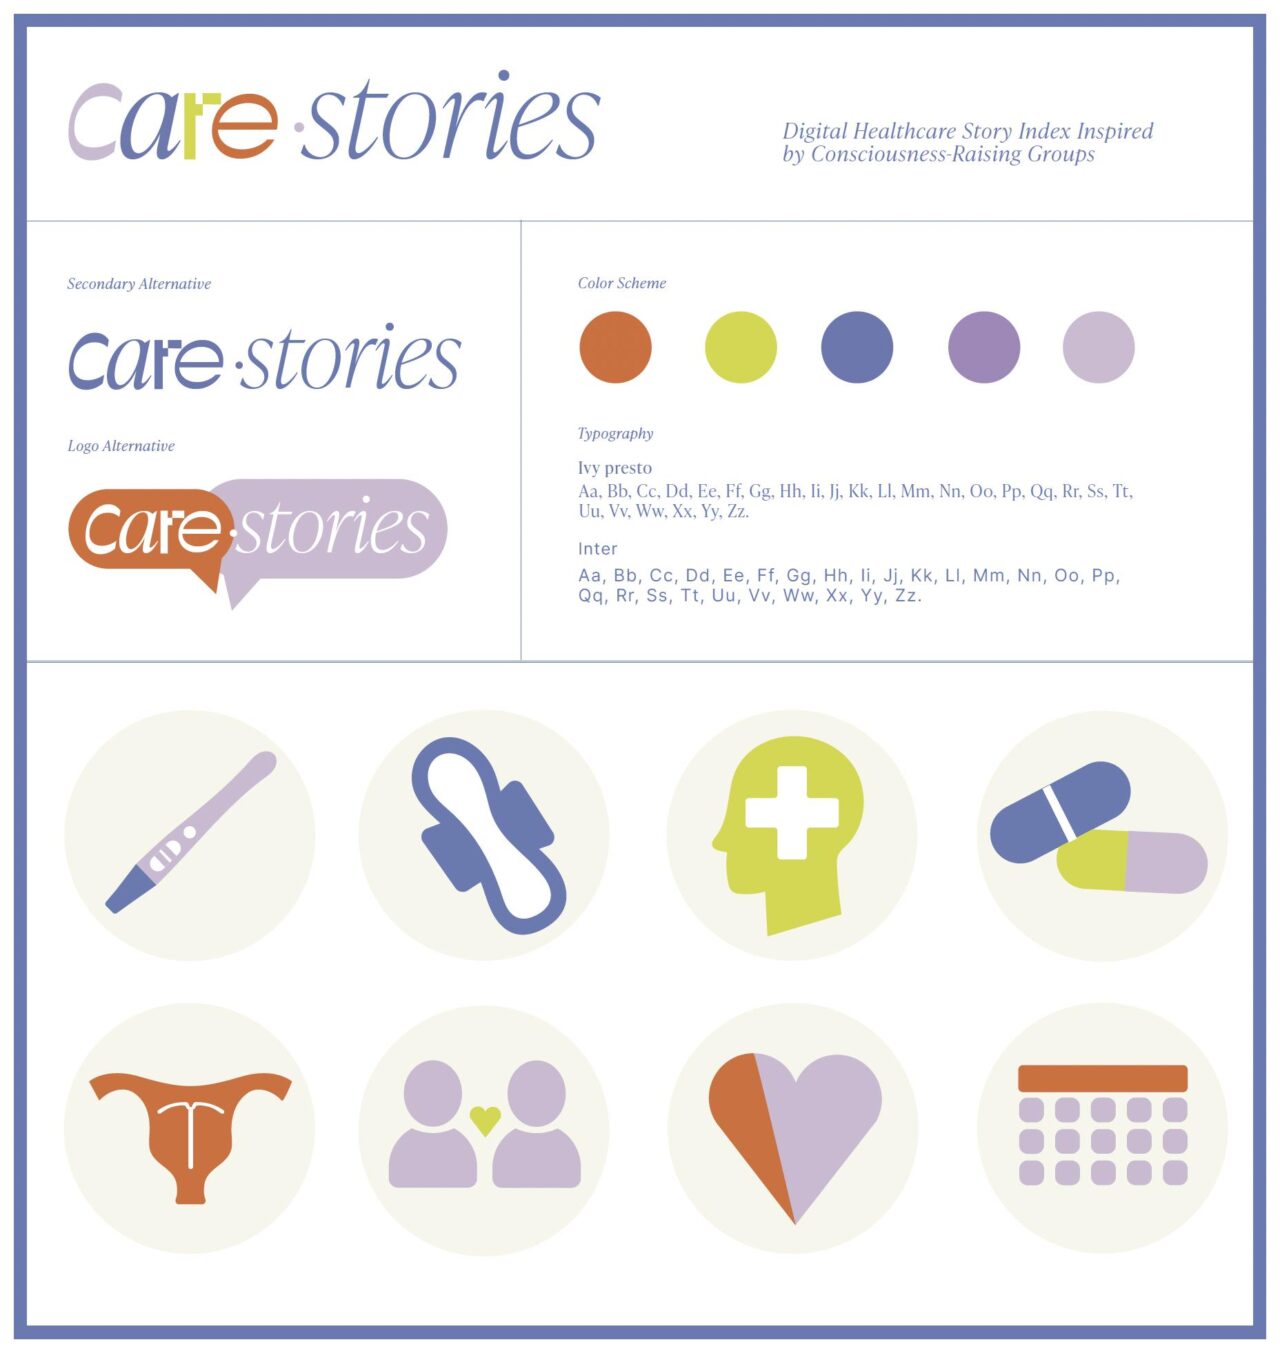 Diagram showing the colorway and icons associated with the Care•Stories brand